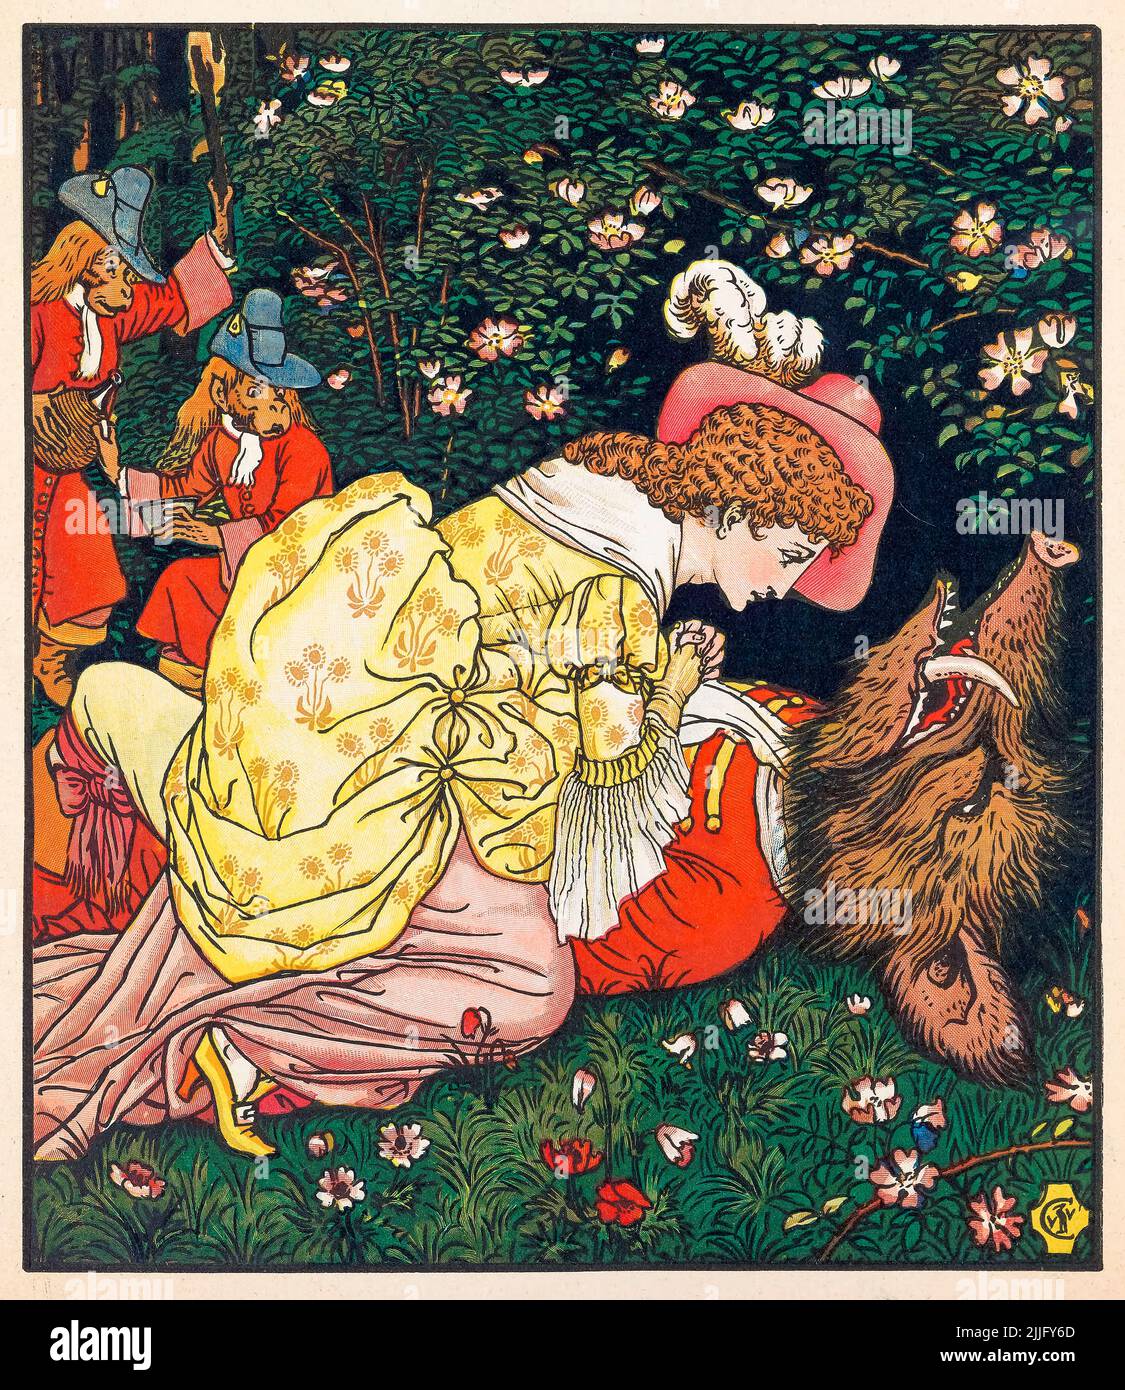 Beauty and The Beast, children's book illustration by Walter Crane, 1874-1875 Stock Photo